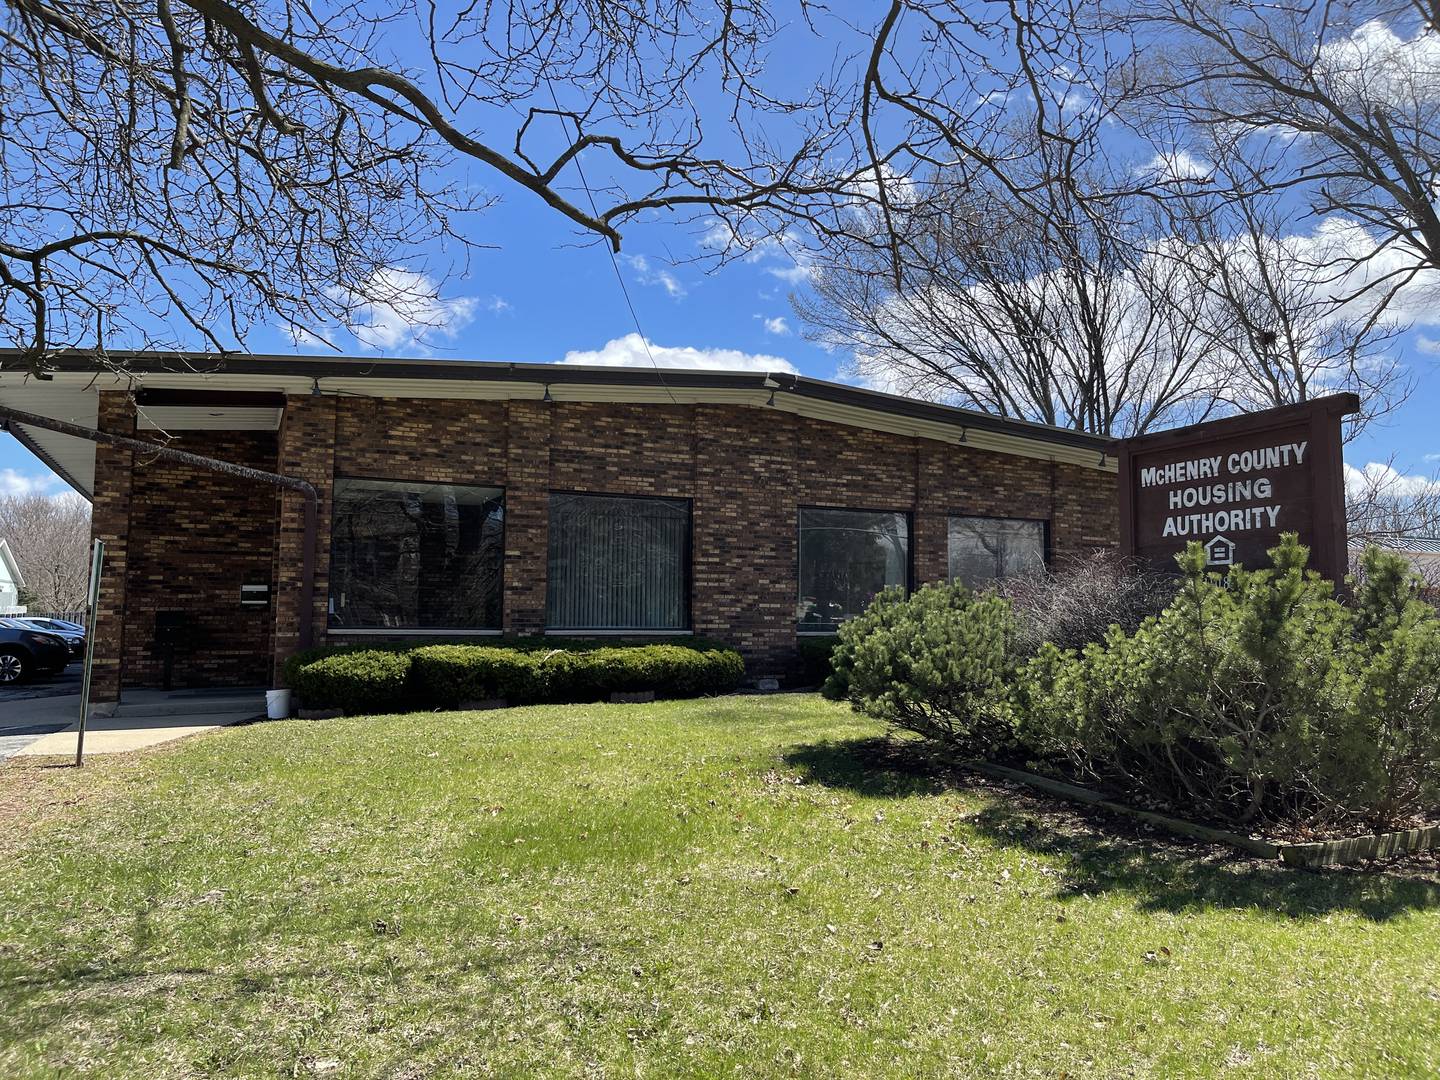 The McHenry County Housing Authority's current facility at 1108 N Seminary Ave. in Woodstock, pictured Thursday, April 14, 2022, is no longer suitable for the organization as it is too small for its 30 staff members to work in. The organization as a result is looking for a new place to set up its offices.